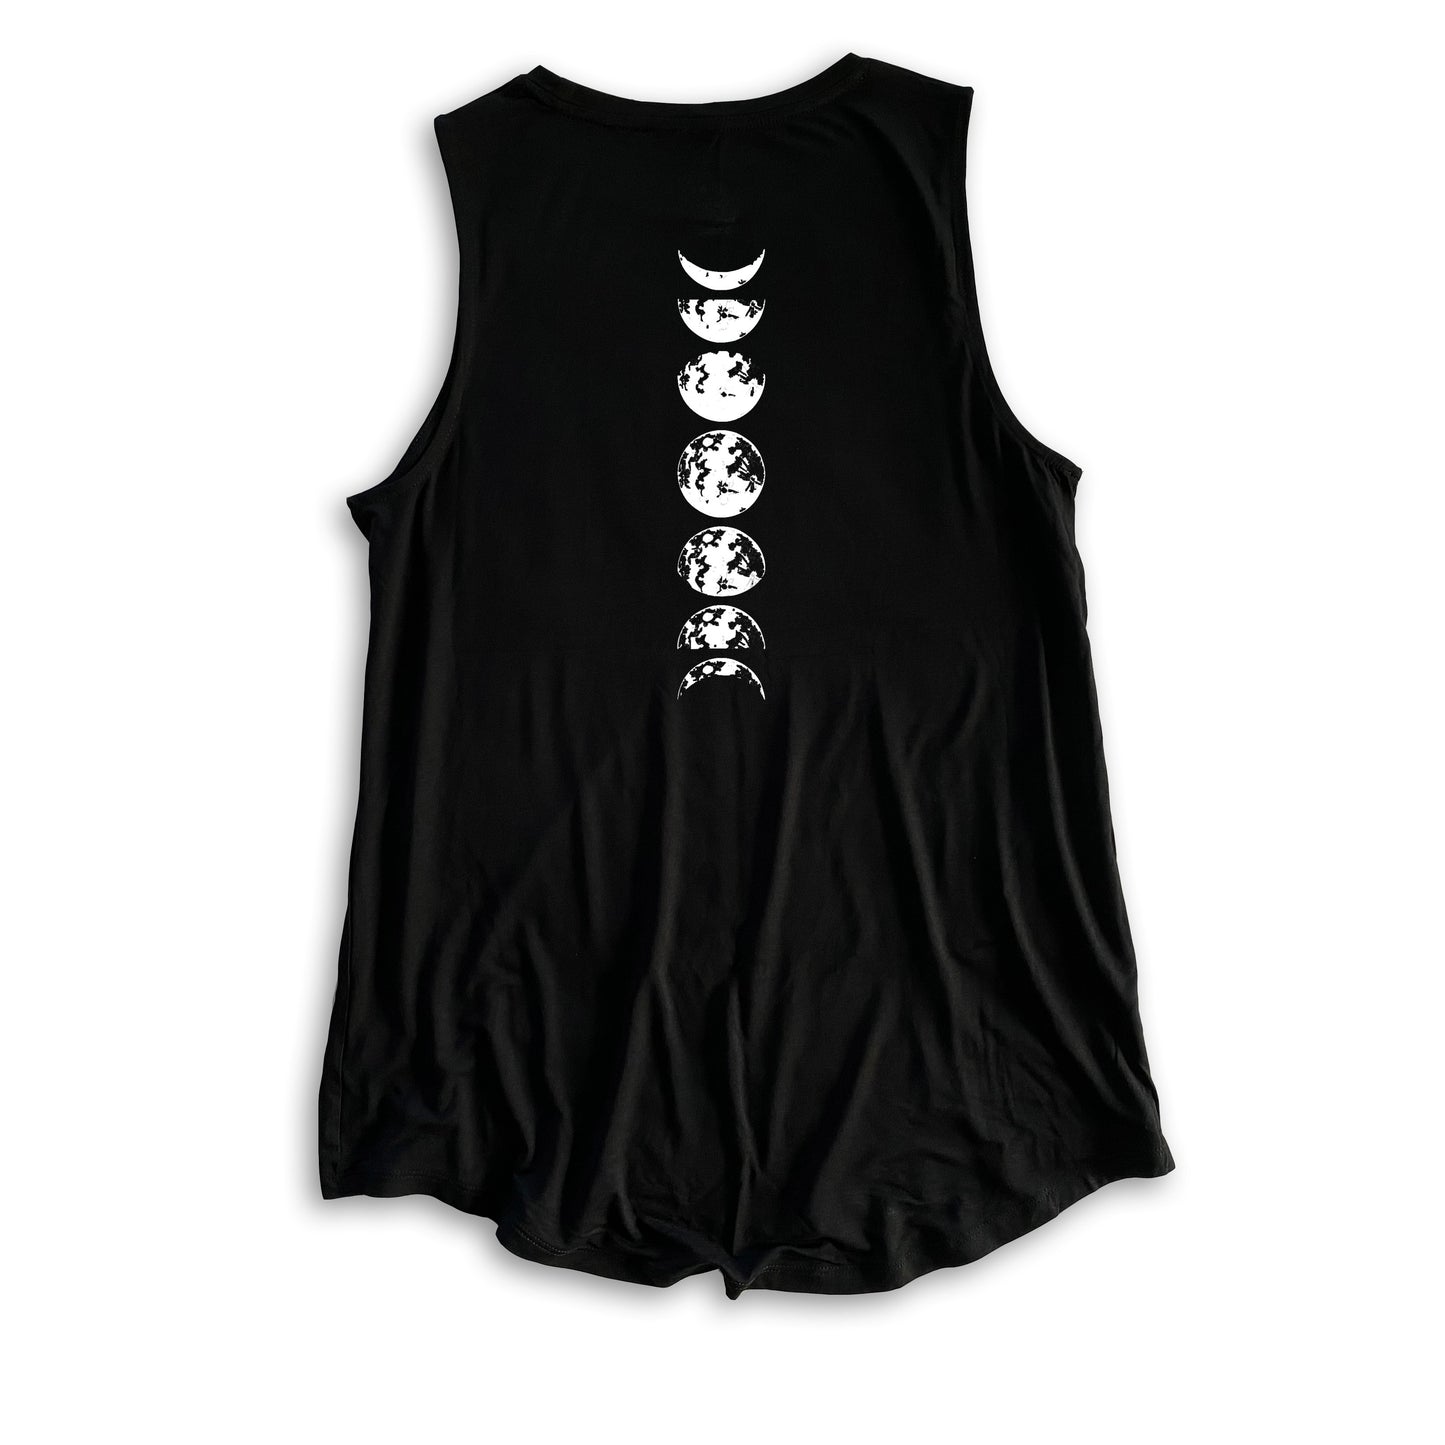 Black Tank Top with Back Graphic